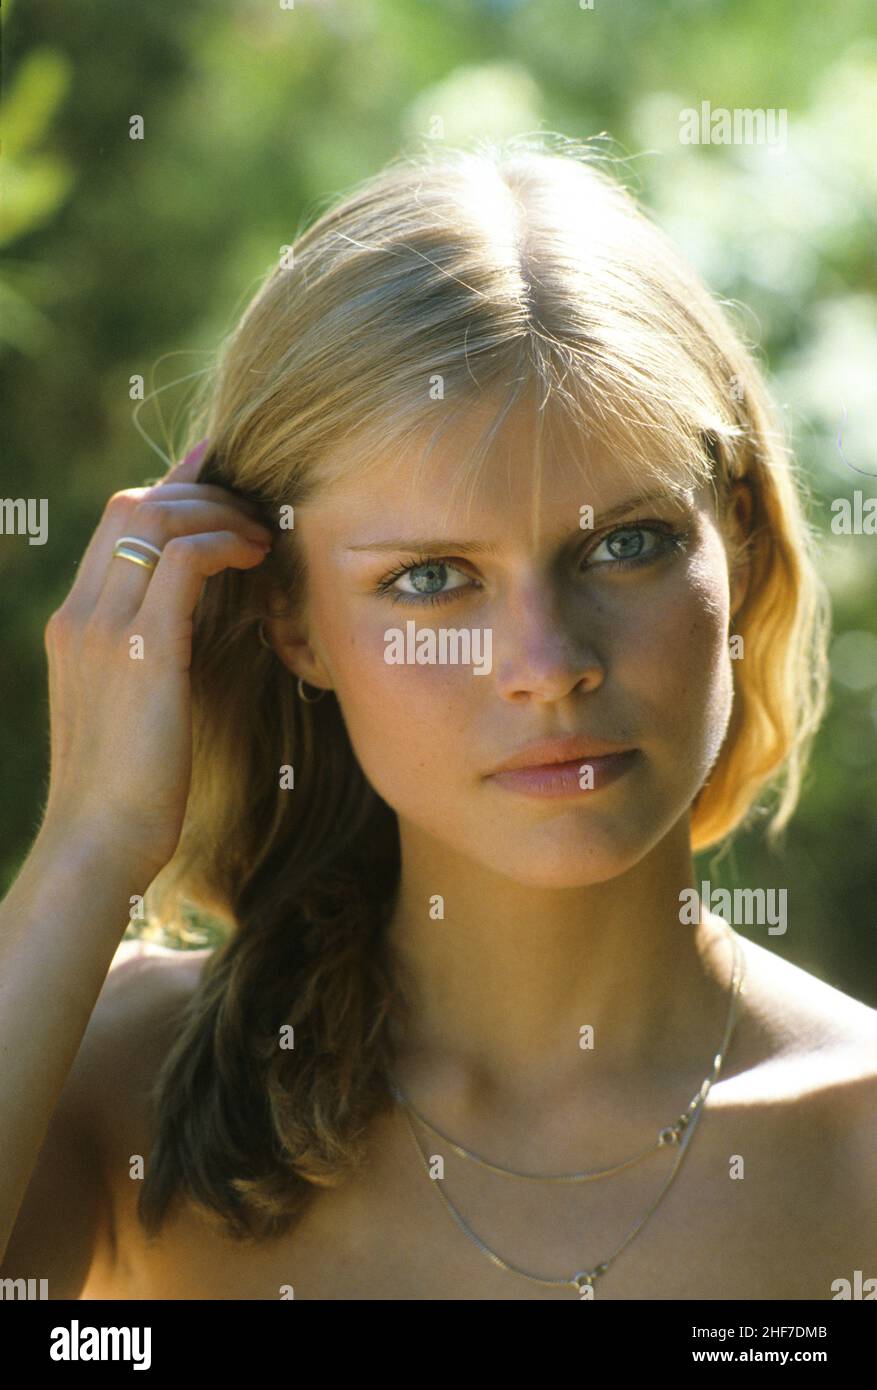 teenager close up portrait natural sweety face green foliage background outdoor green eyes good looking Stock Photo